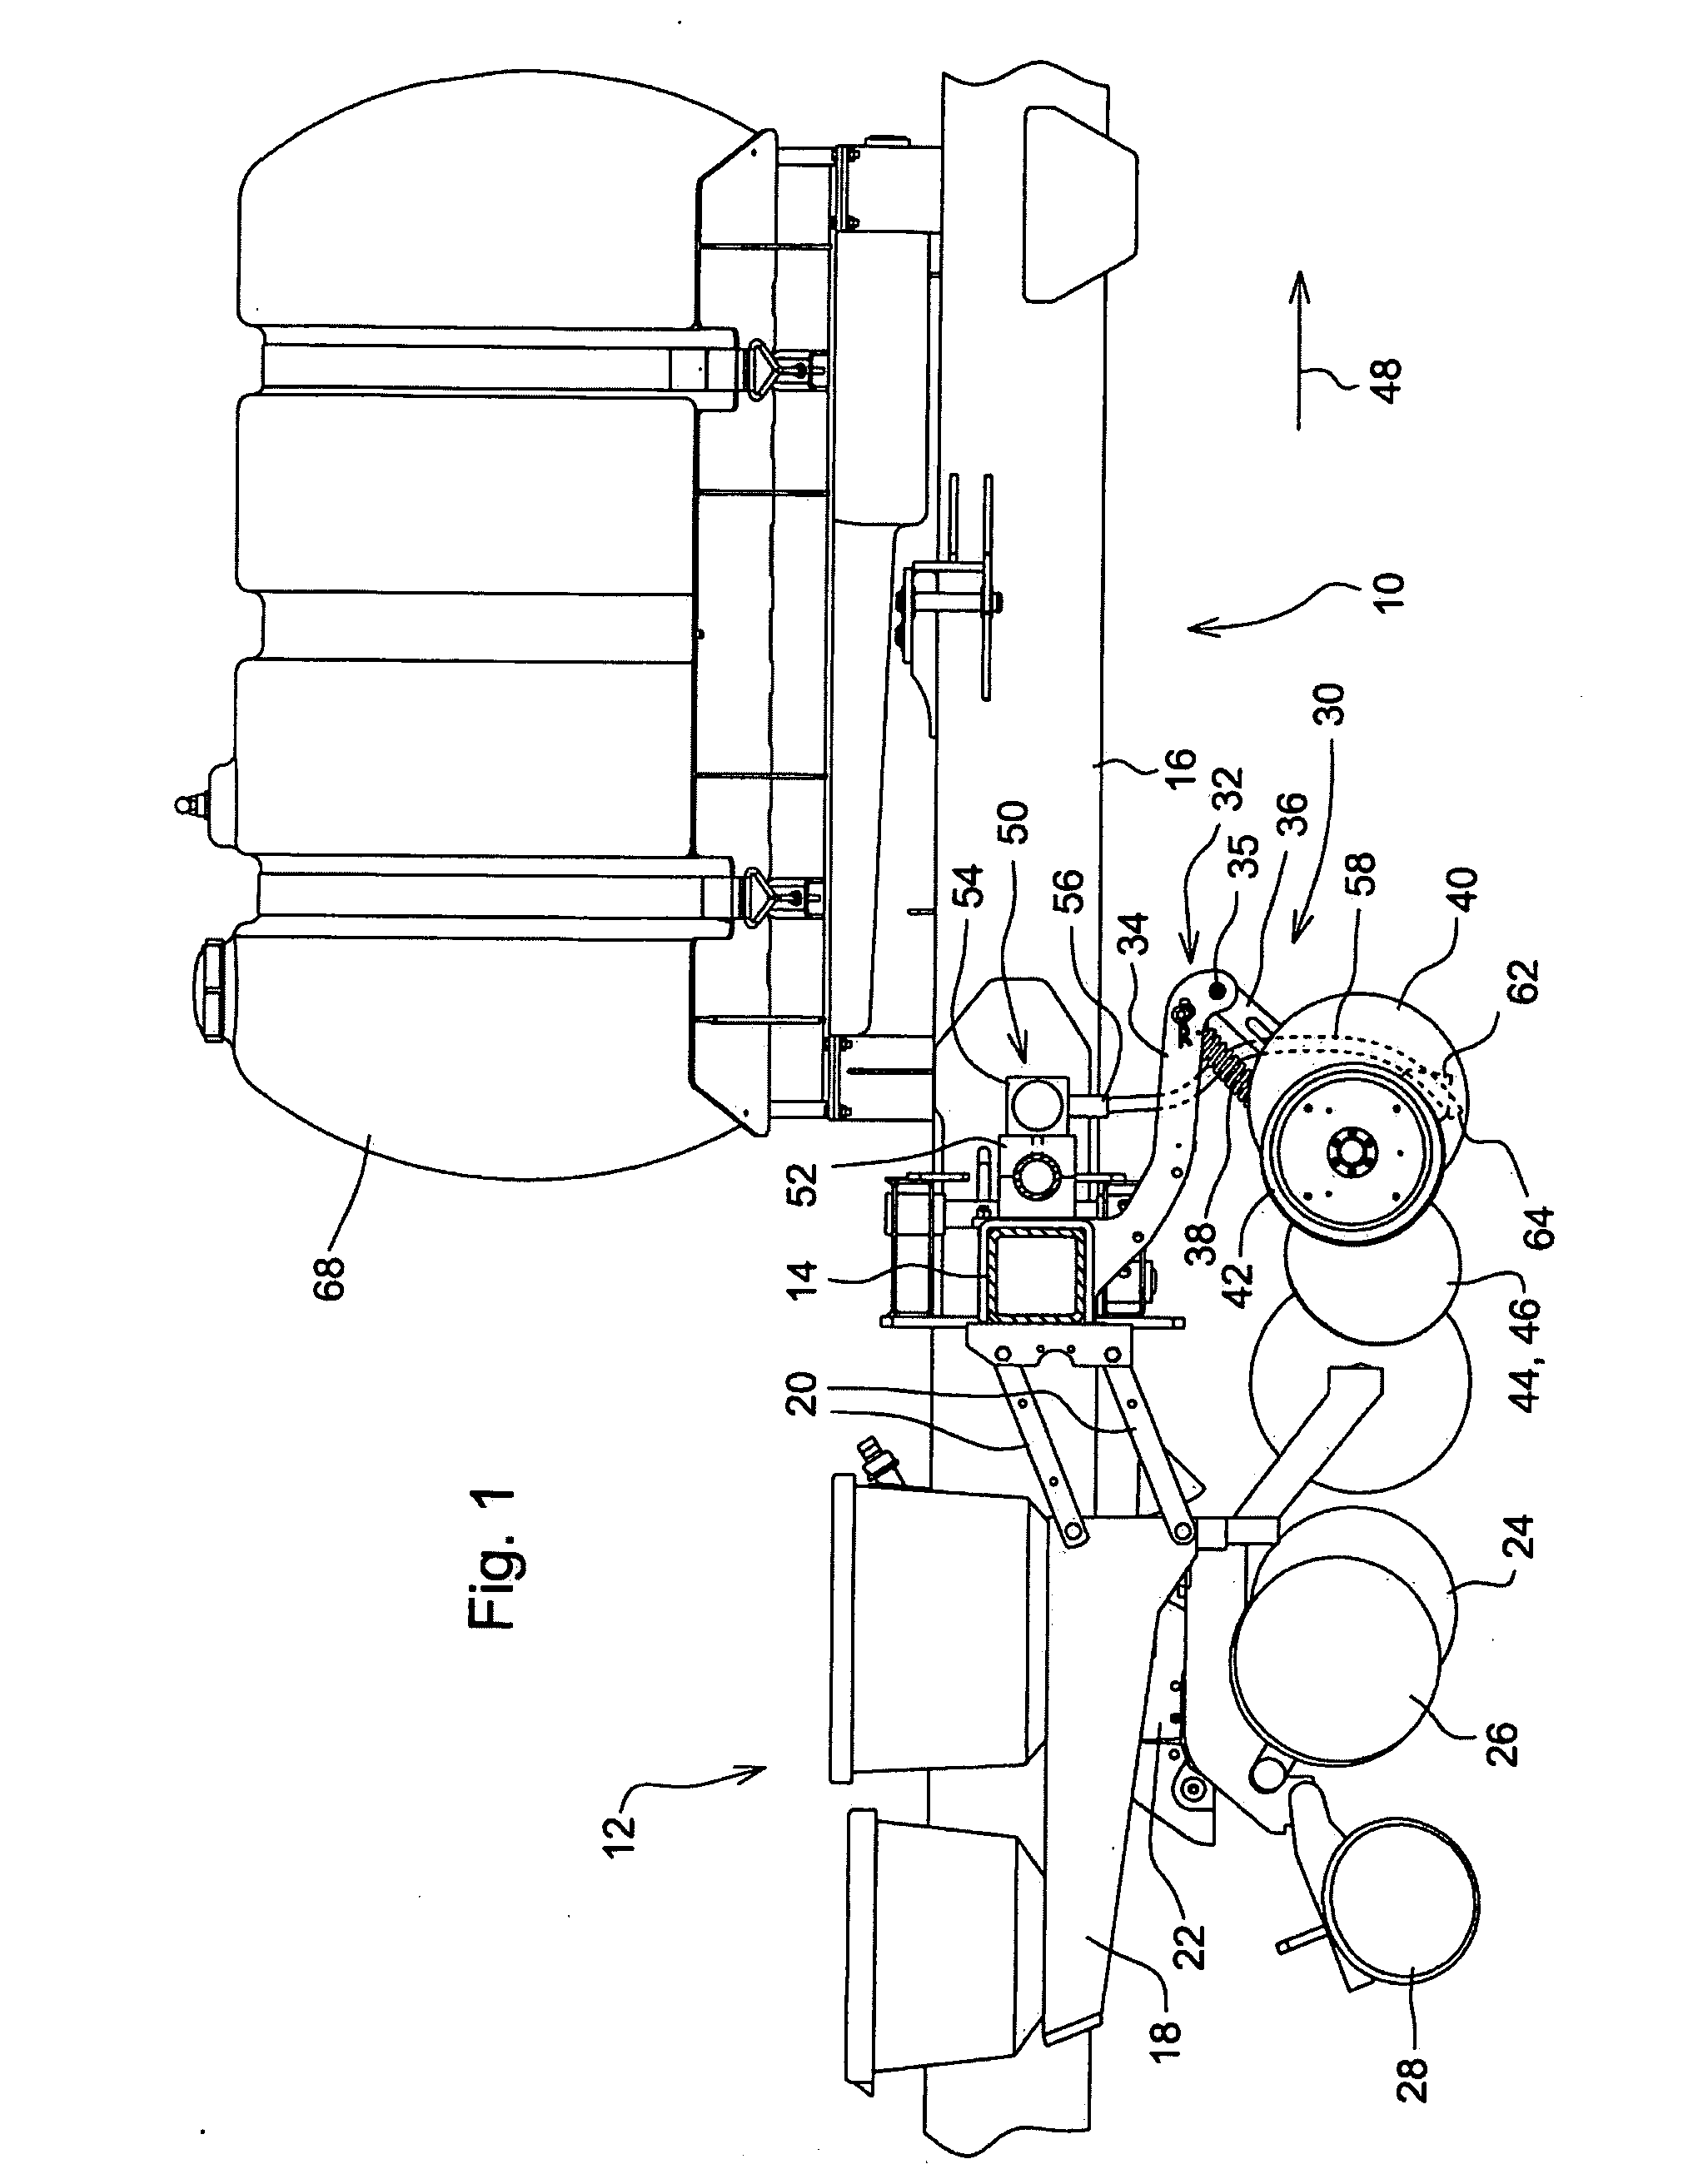 Modular liquid metering system for an agricultural implement